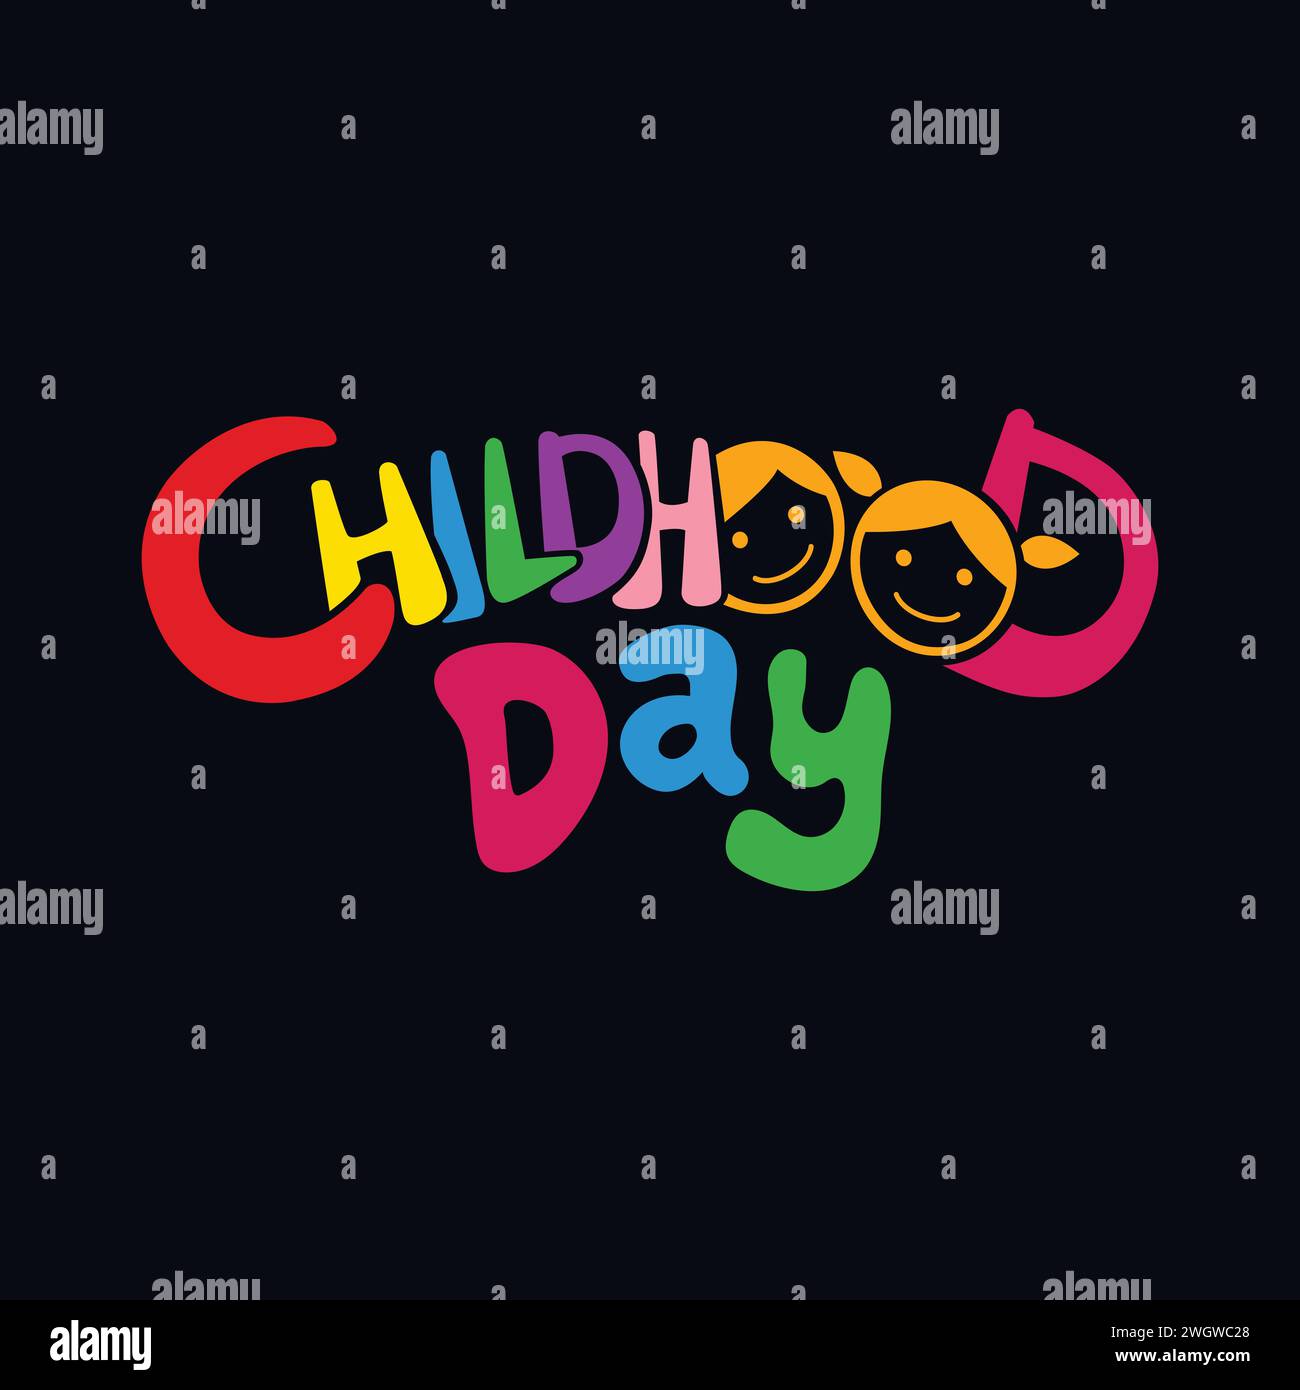 Childhood day vector lettering illustration with kids cartoon face. Childhood cancer day logo. Colorful design. Stock Vector